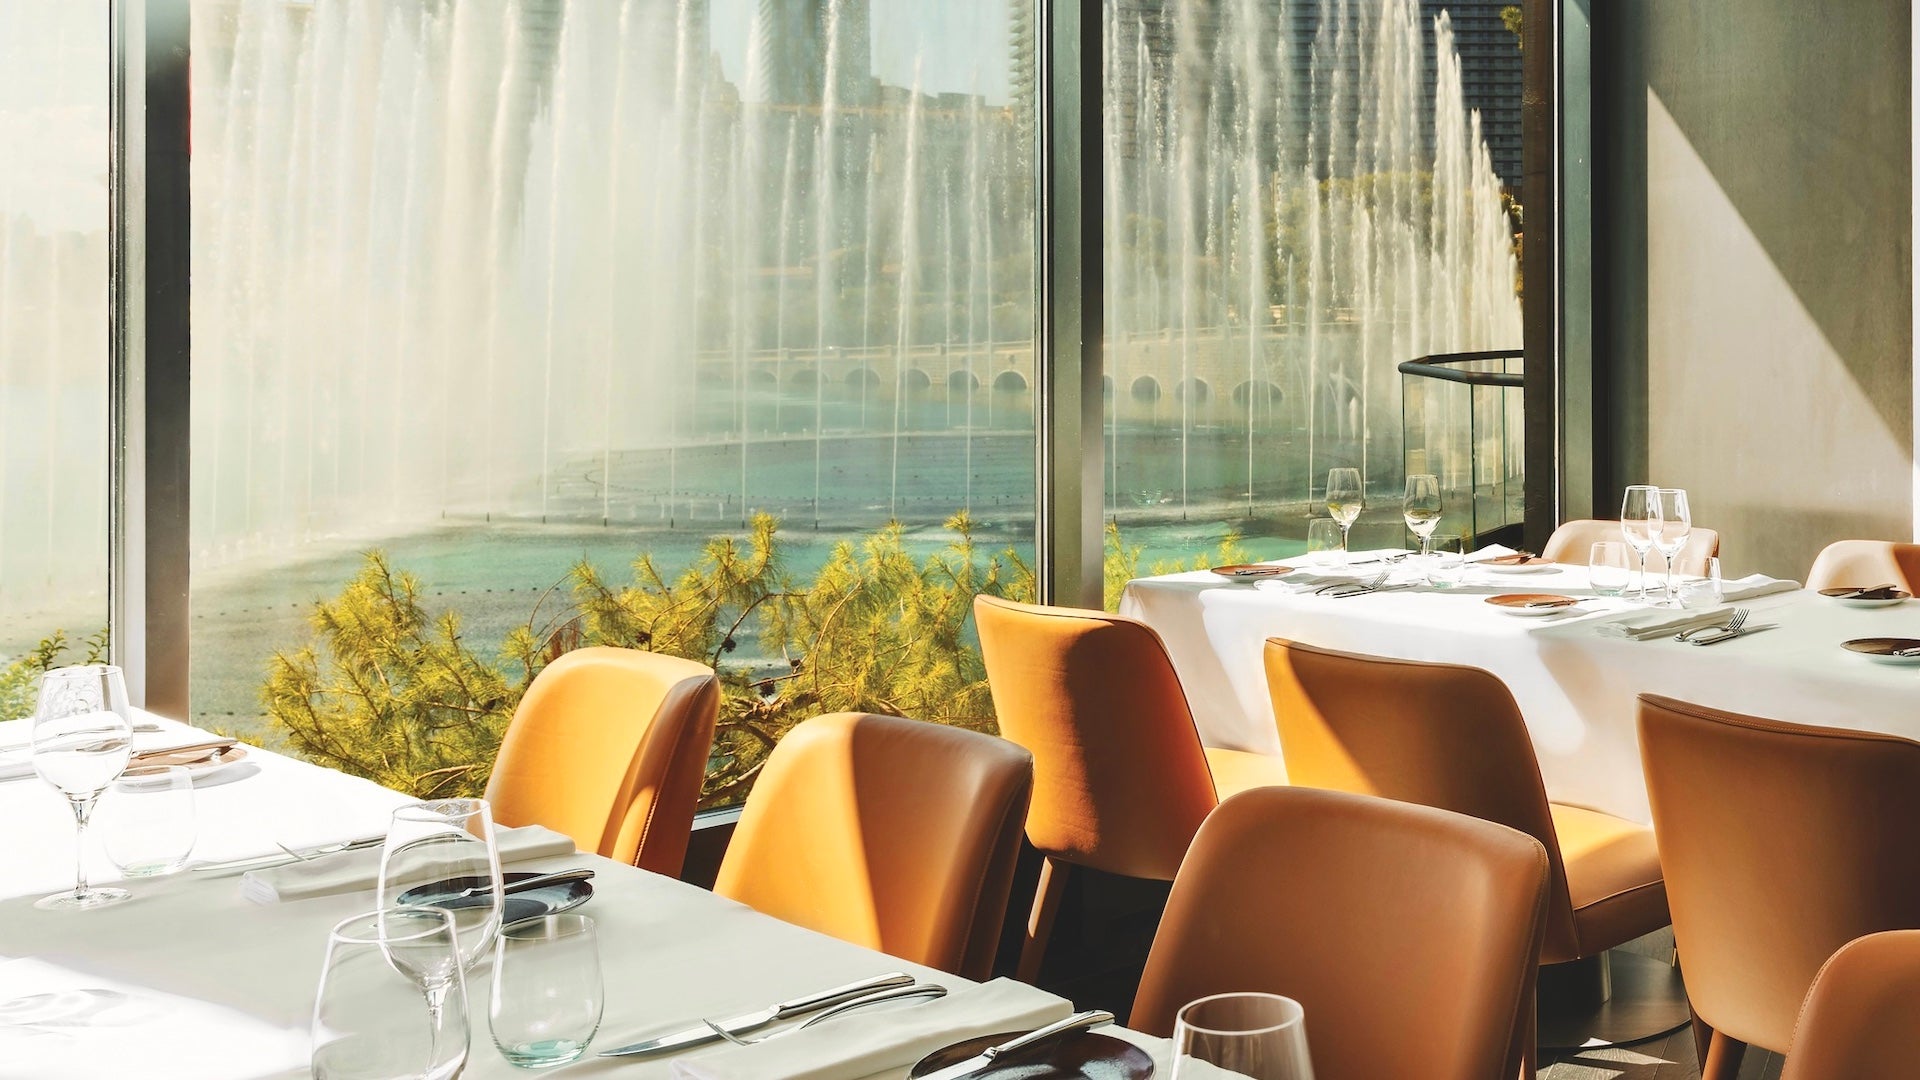 Chairs and white tables with a window view of the Bellagio fountains